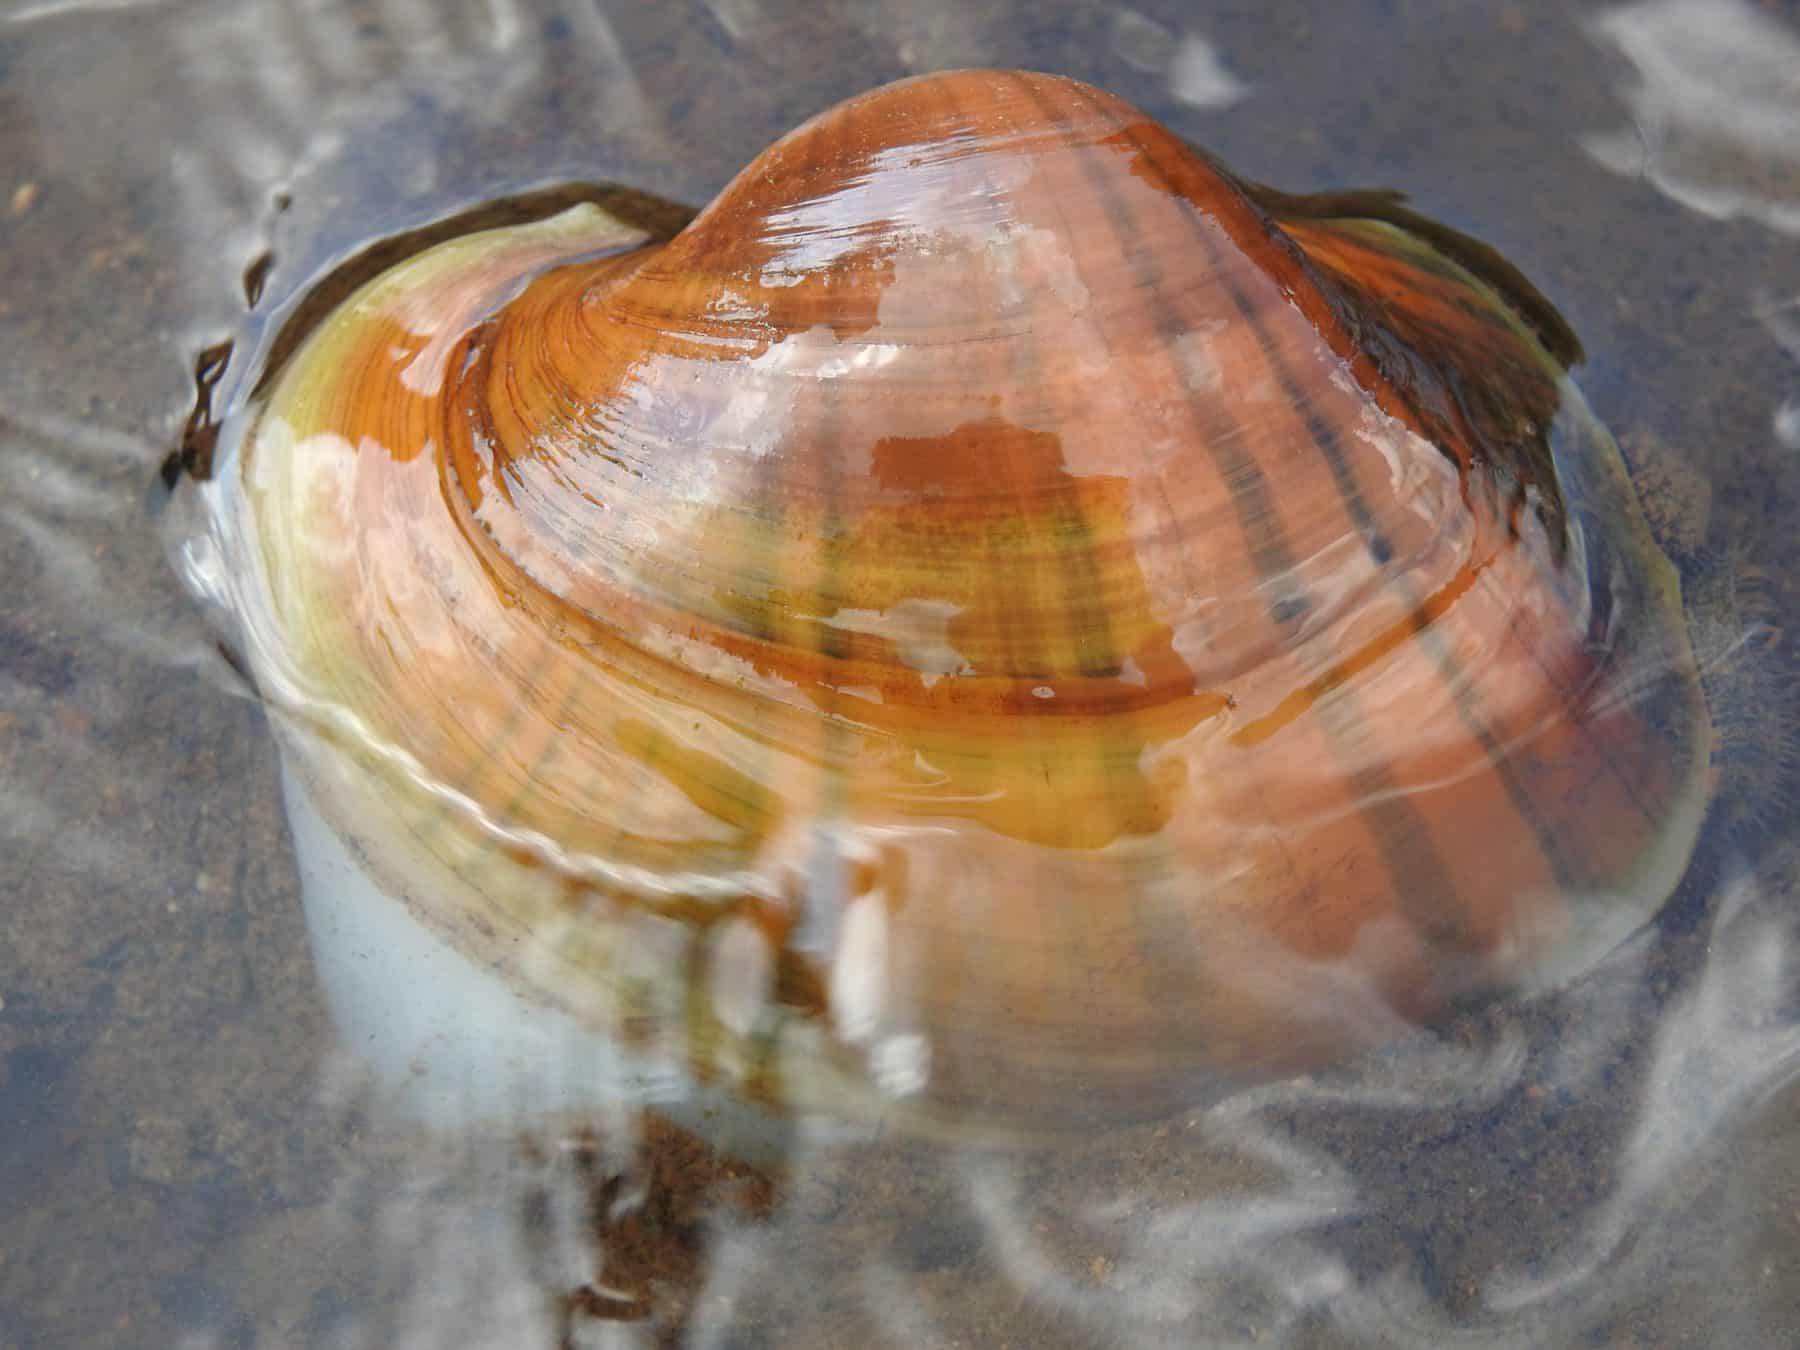 A mighty mussel. (Photo Credit: Sophia Patane, Wild Rivers Conservancy)